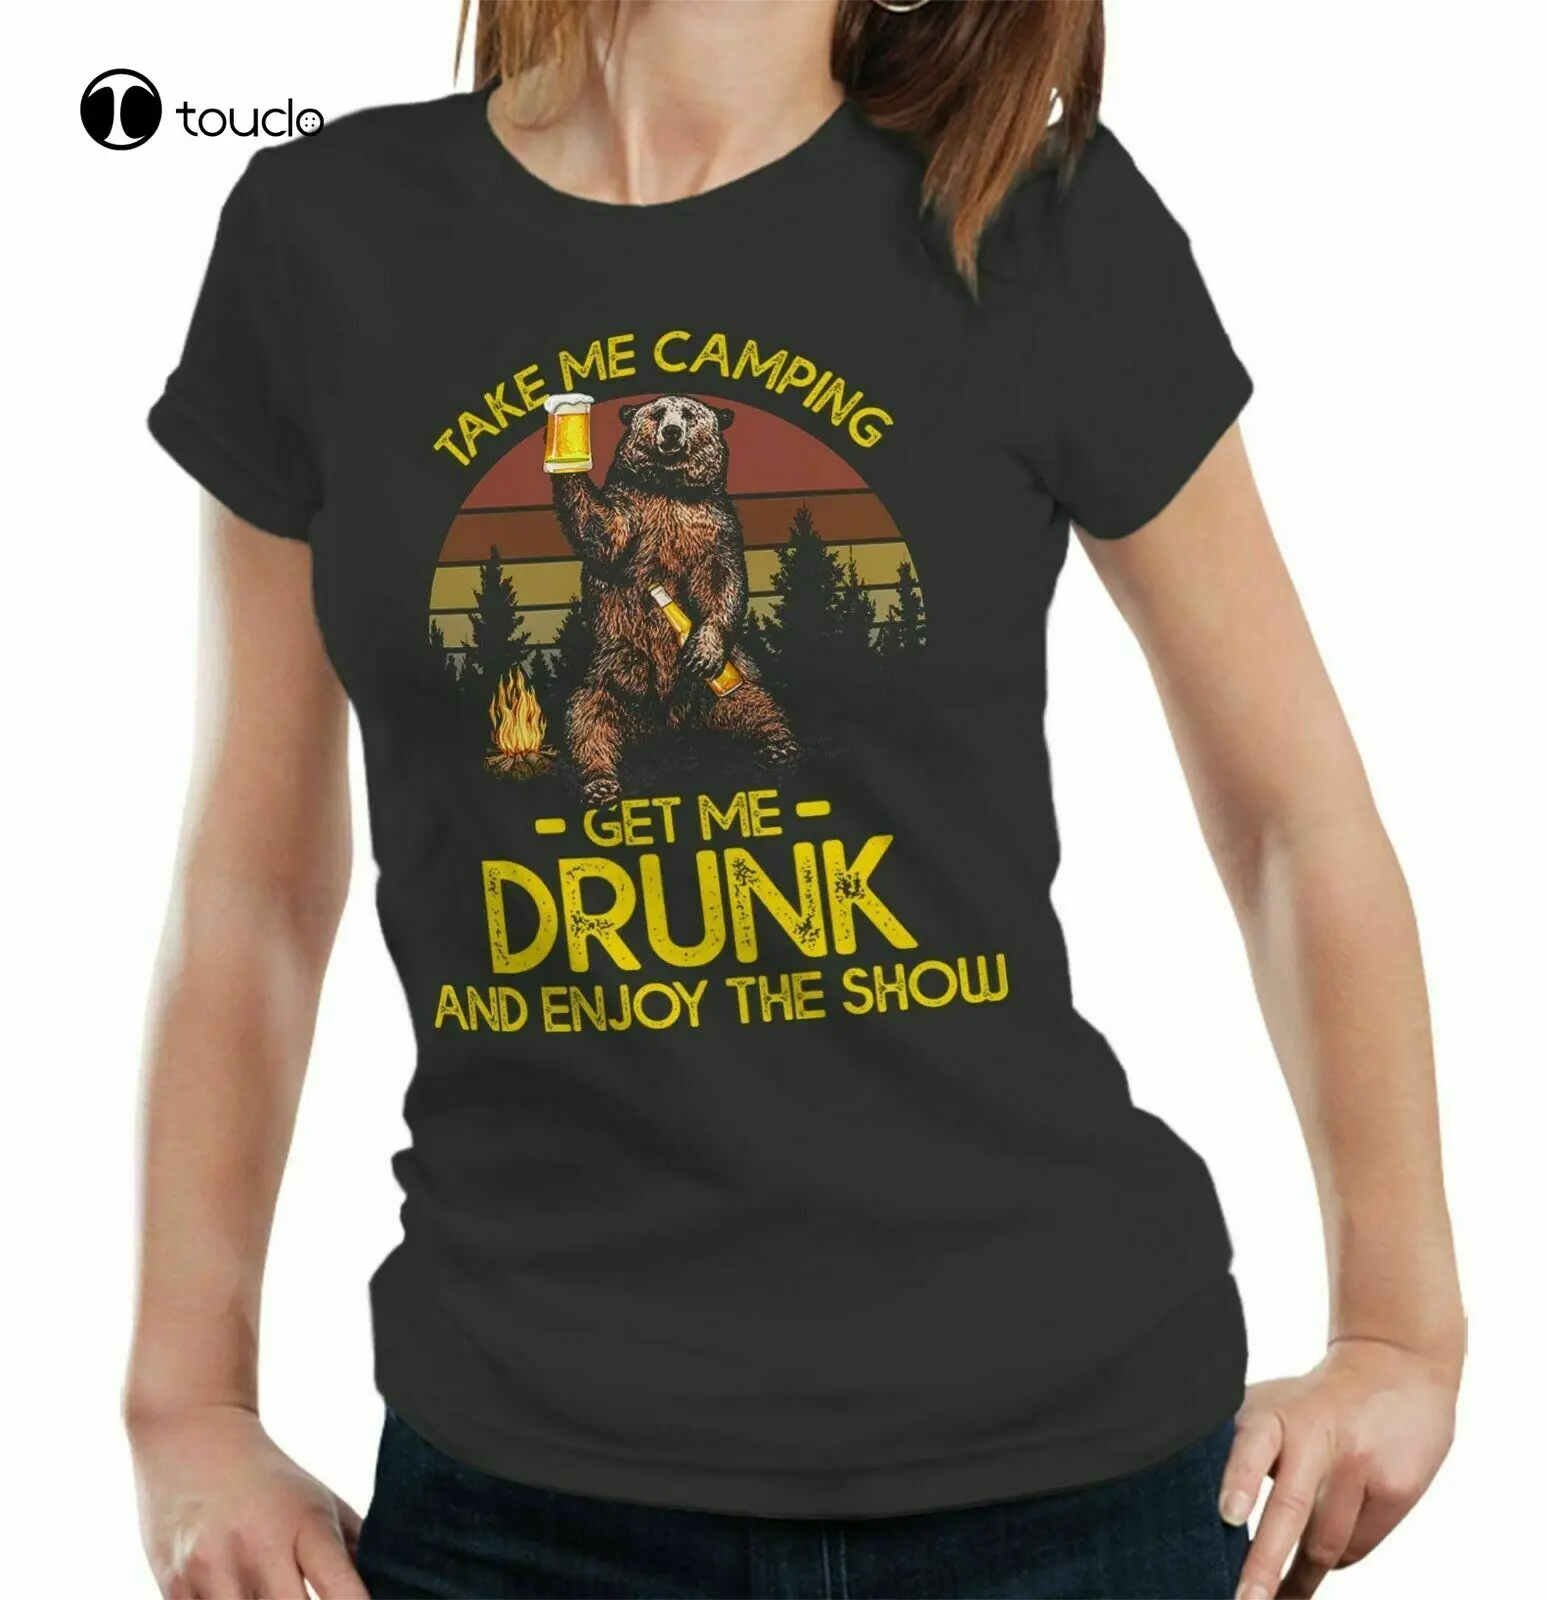 

Take Me Camping Get Me Drunk Tshirt Fitted Ladies - Explore, Adventure, Funny Tee Shirt unisex